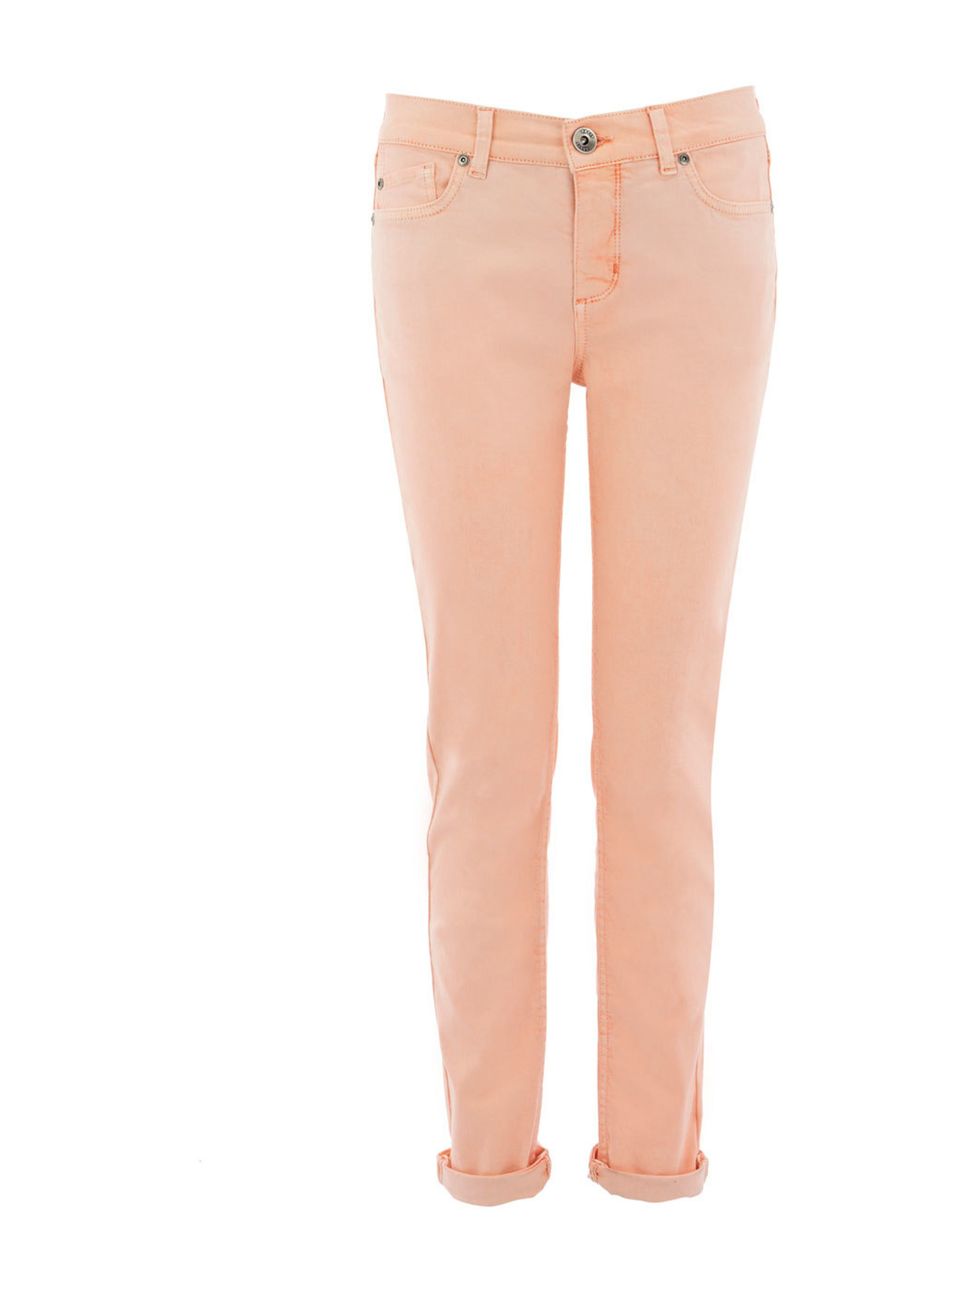 <p>Make sure to add a pair of season-defying pastel jeans to your wish list  theyre guaranteed to be just as covetable in the height of summer as they are right now <a href="http://www.oasis-stores.com/ALLDenim/dept/fcp-category/categorylist?resetFilte